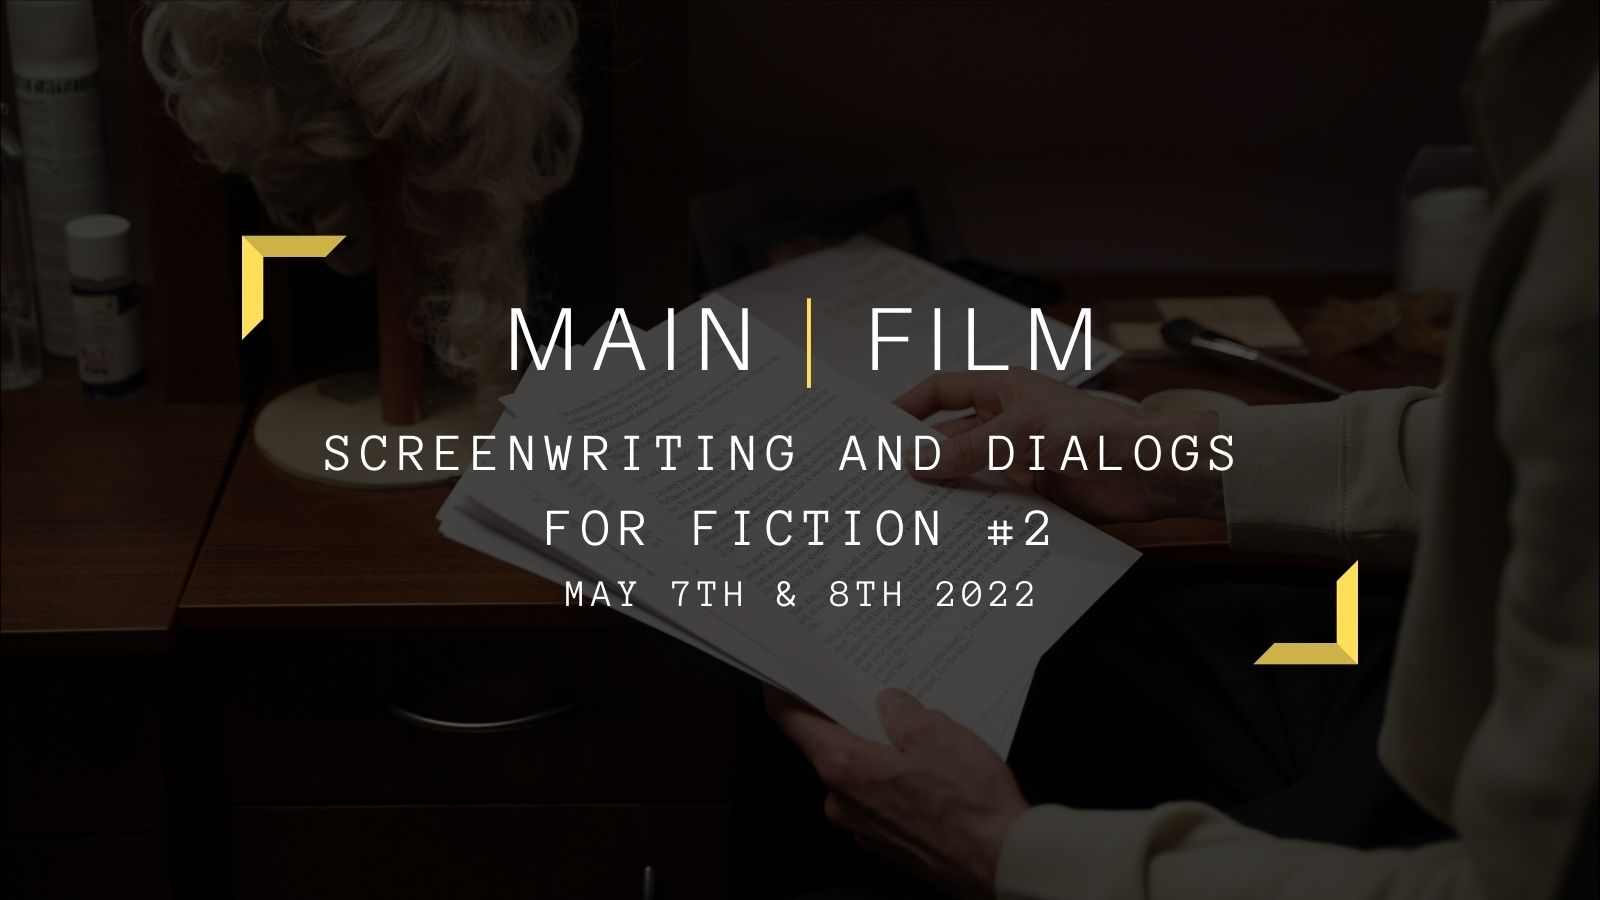 Screenwriting and dialogs for Fiction #2 | In-person